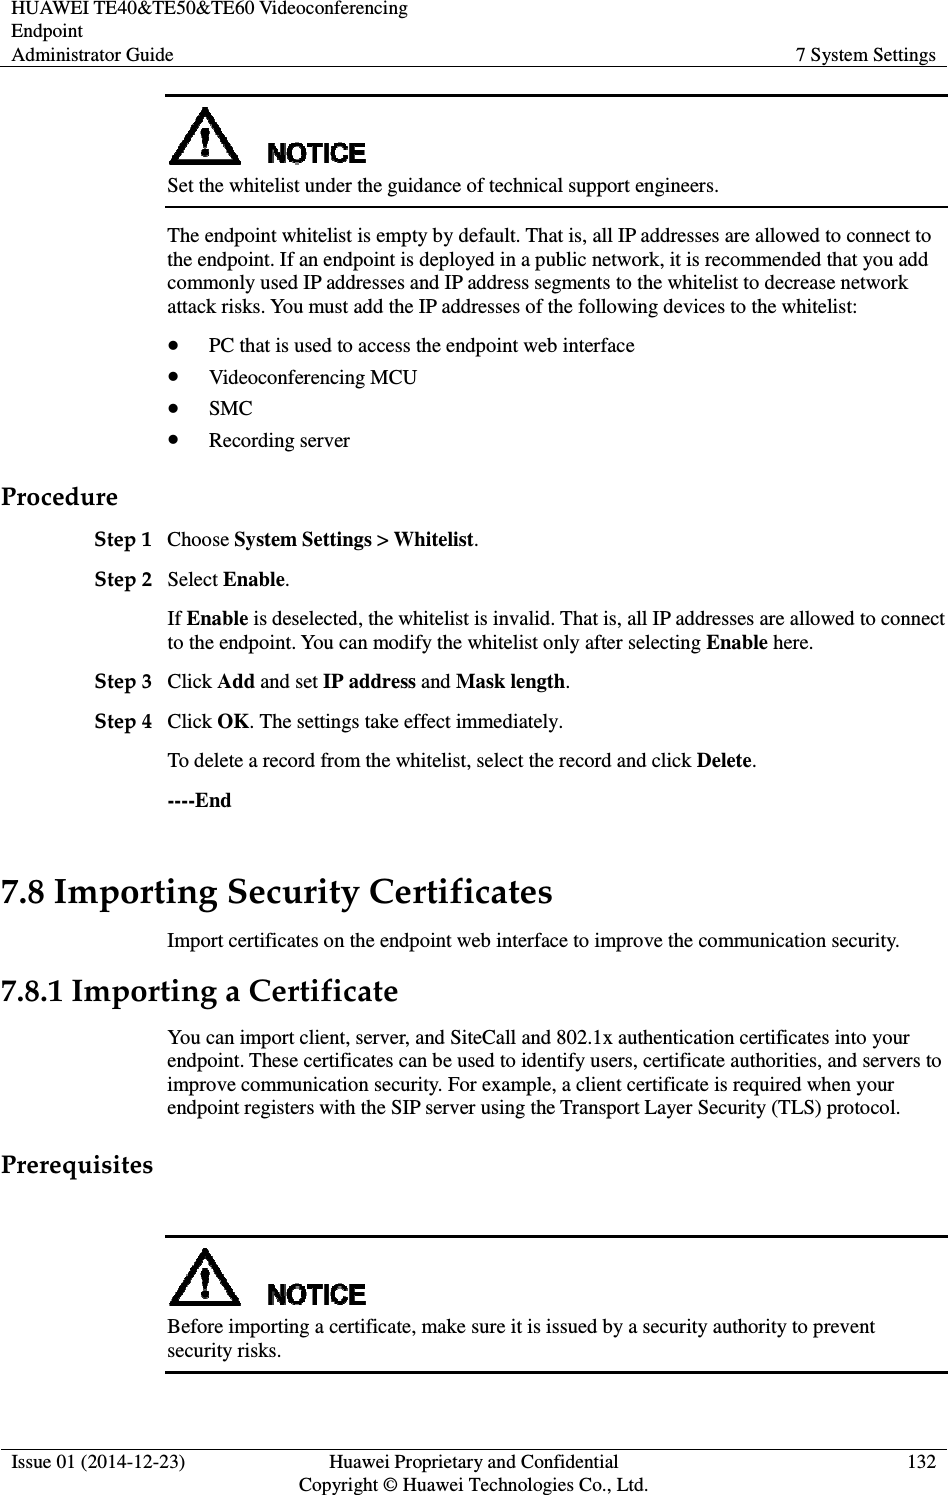 HUAWEI TE40&amp;TE50&amp;TE60 Videoconferencing Endpoint Administrator Guide  7 System Settings  Issue 01 (2014-12-23)  Huawei Proprietary and Confidential                                     Copyright © Huawei Technologies Co., Ltd. 132   Set the whitelist under the guidance of technical support engineers.   The endpoint whitelist is empty by default. That is, all IP addresses are allowed to connect to the endpoint. If an endpoint is deployed in a public network, it is recommended that you add commonly used IP addresses and IP address segments to the whitelist to decrease network attack risks. You must add the IP addresses of the following devices to the whitelist:    PC that is used to access the endpoint web interface  Videoconferencing MCU  SMC  Recording server Procedure Step 1 Choose System Settings &gt; Whitelist.   Step 2 Select Enable. If Enable is deselected, the whitelist is invalid. That is, all IP addresses are allowed to connect to the endpoint. You can modify the whitelist only after selecting Enable here.   Step 3 Click Add and set IP address and Mask length.   Step 4 Click OK. The settings take effect immediately.   To delete a record from the whitelist, select the record and click Delete.   ----End 7.8 Importing Security Certificates Import certificates on the endpoint web interface to improve the communication security. 7.8.1 Importing a Certificate You can import client, server, and SiteCall and 802.1x authentication certificates into your endpoint. These certificates can be used to identify users, certificate authorities, and servers to improve communication security. For example, a client certificate is required when your endpoint registers with the SIP server using the Transport Layer Security (TLS) protocol. Prerequisites   Before importing a certificate, make sure it is issued by a security authority to prevent security risks. 